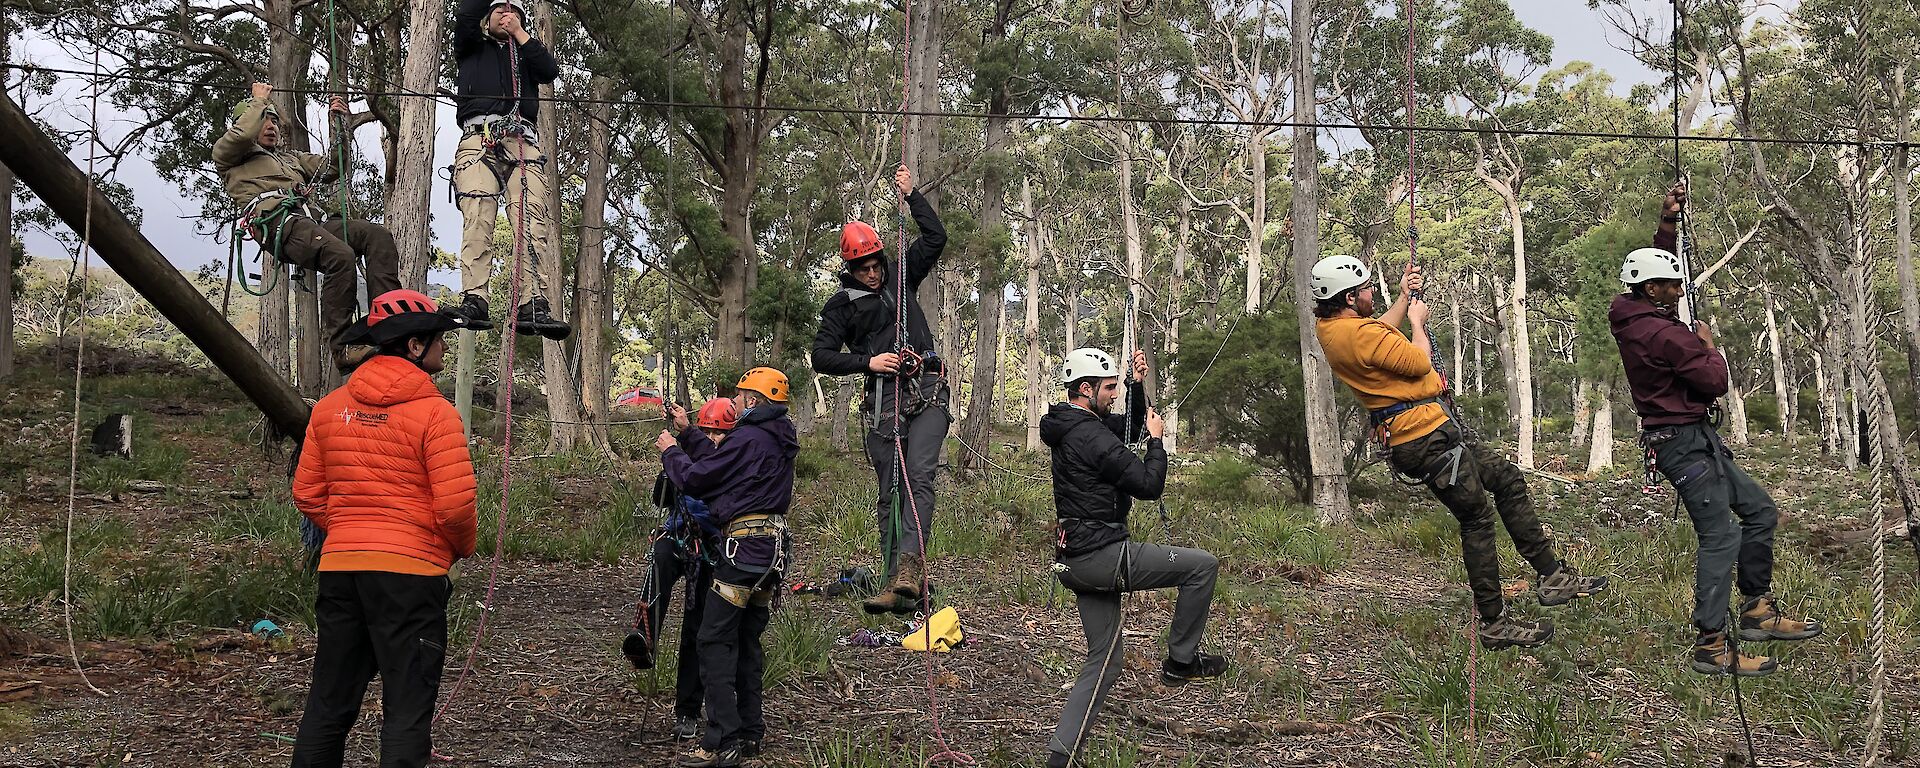 Six people embarking on a ropes course wearing hardhats.